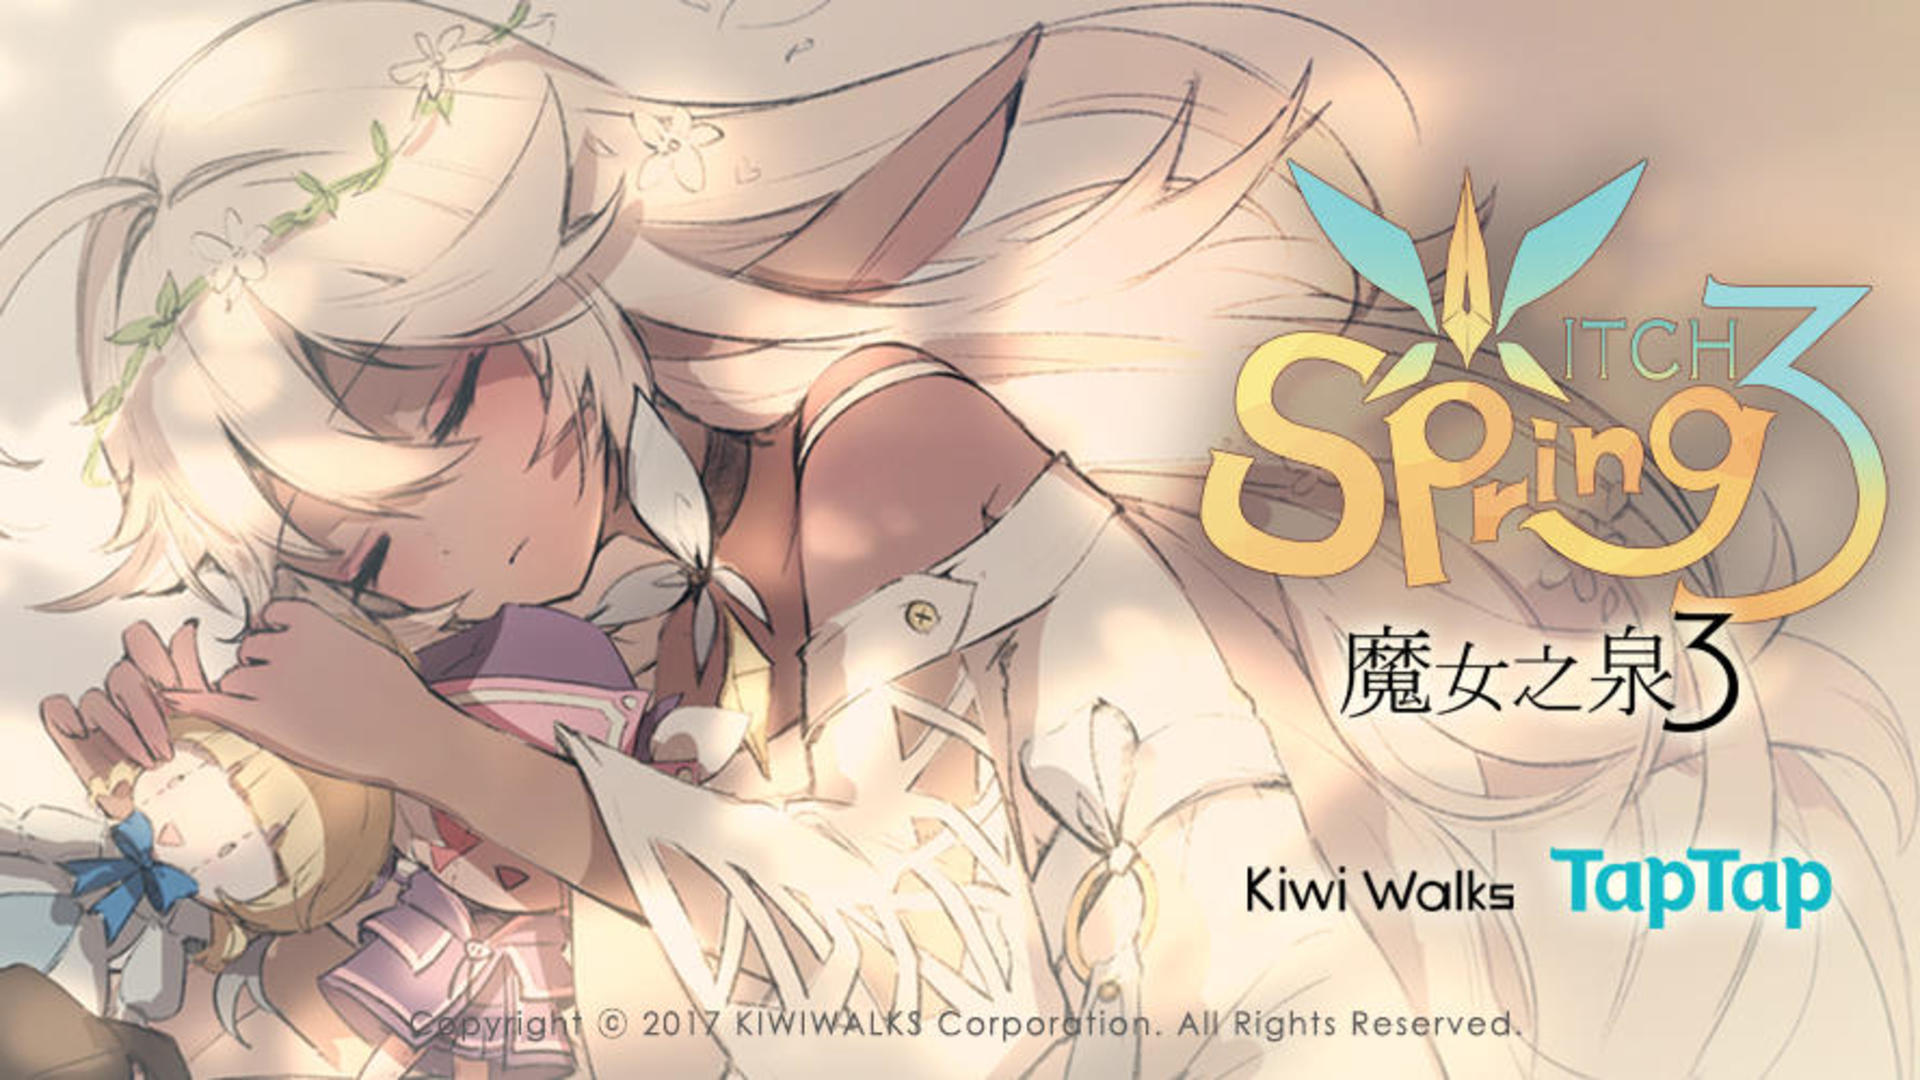 Banner of WitchSpring3 